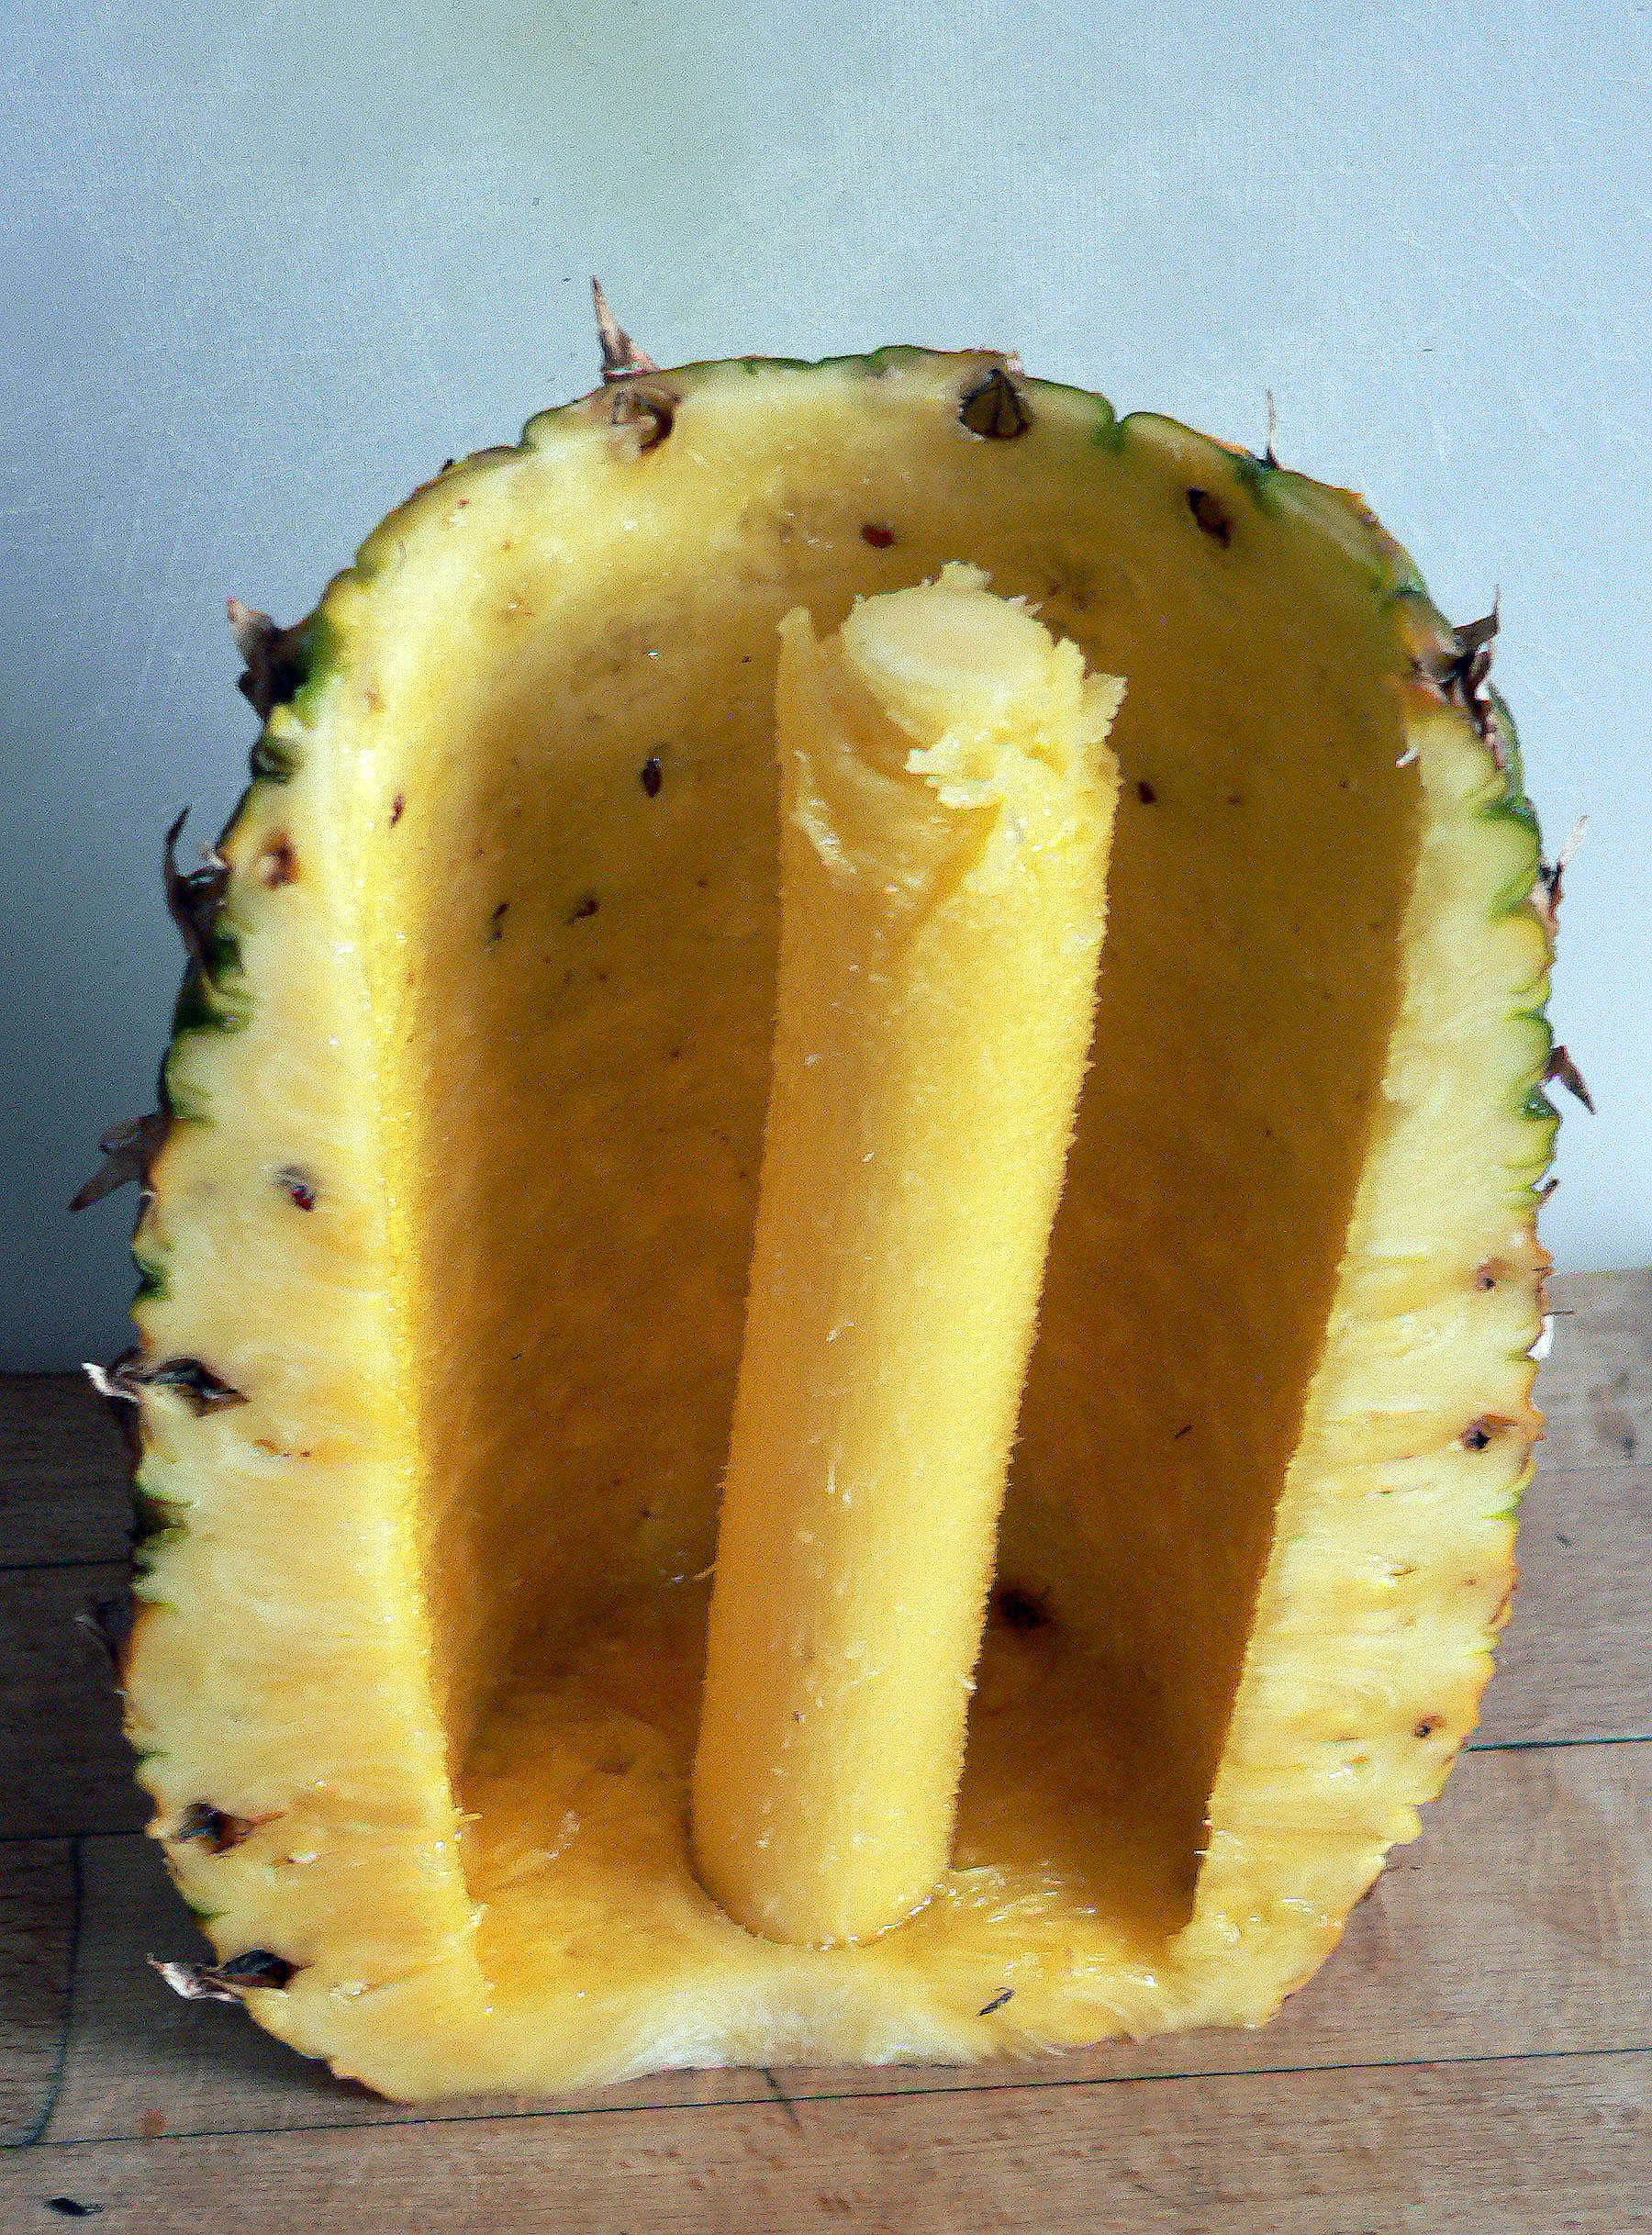 Interior of pineapple after pineapple slicer use